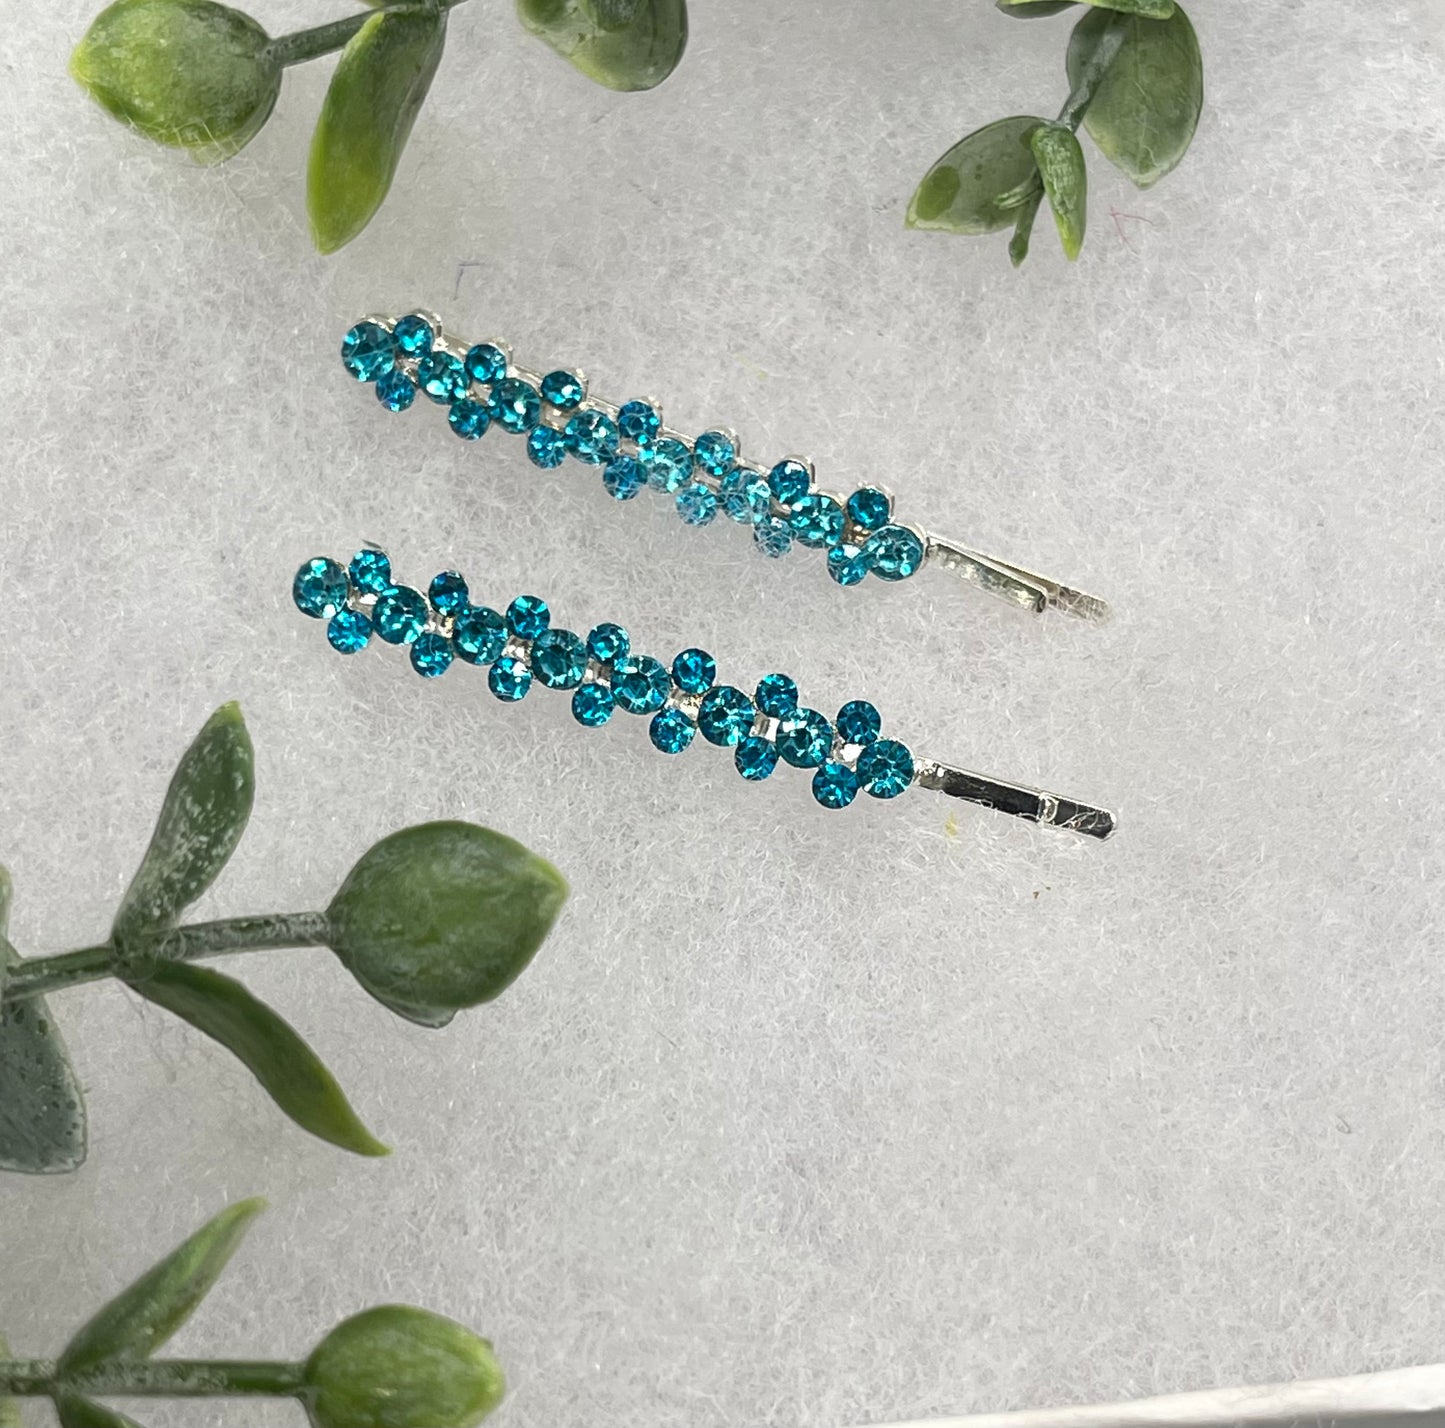 Teal Crystal Rhinestone Bobby pin hair pins set approximately 2..5 silver tone formal hair accessory gift